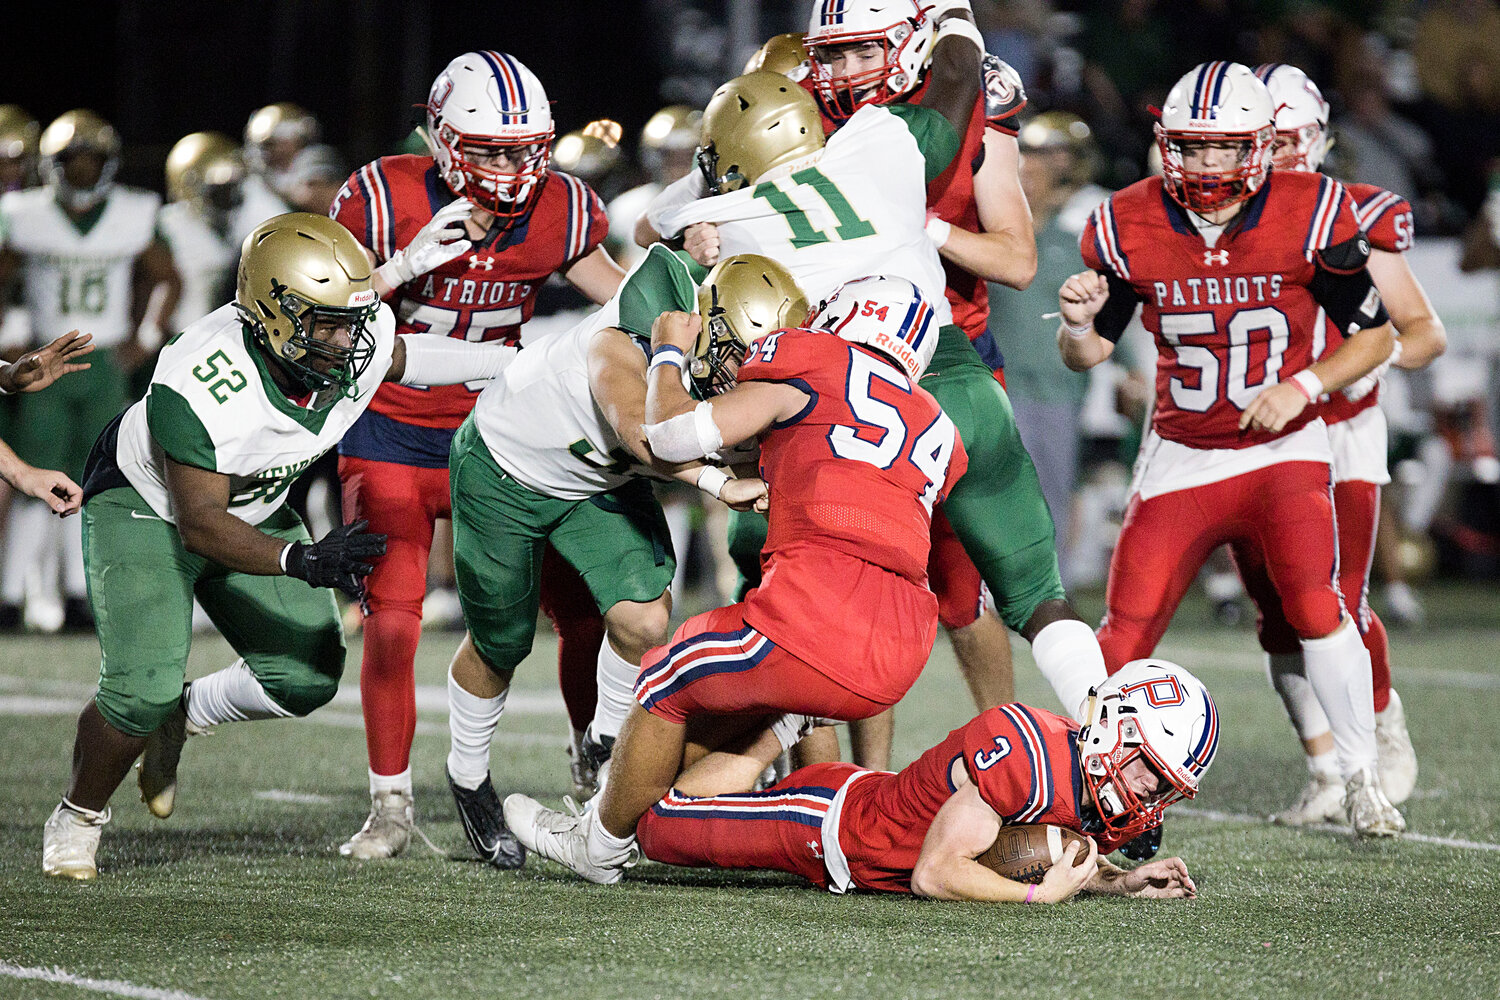 Jack Voute (on the ground) dives through the Hendricken defense to gain yardage for the Patriots.